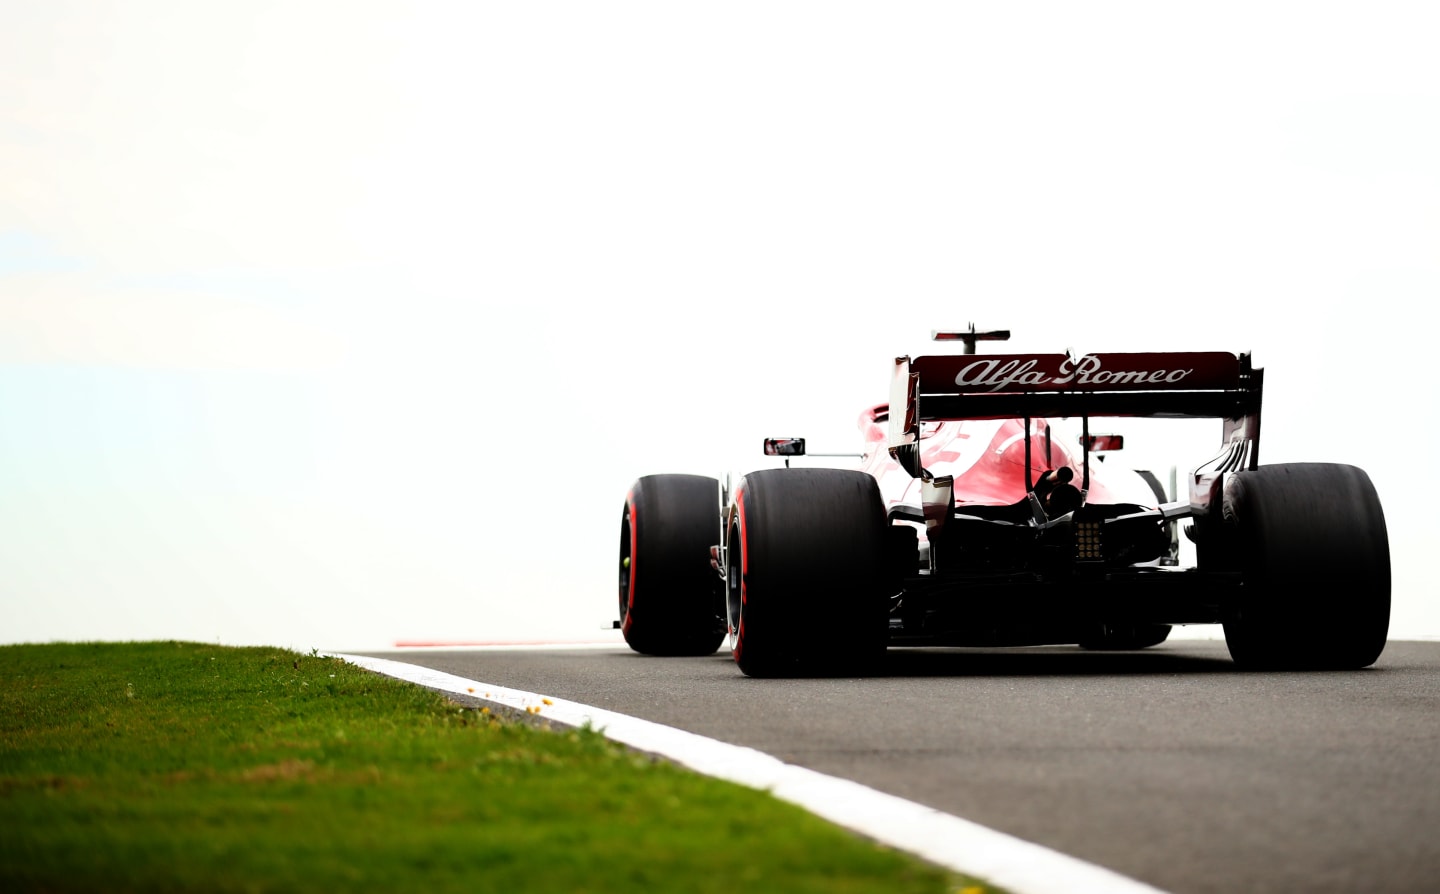 NORTHAMPTON, ENGLAND - AUGUST 07: Kimi Raikkonen of Finland driving the (7) Alfa Romeo Racing C39 Ferrari leaves the pit lane during practice for the F1 70th Anniversary Grand Prix at Silverstone on August 07, 2020 in Northampton, England. (Photo by Bryn Lennon/Getty Images)